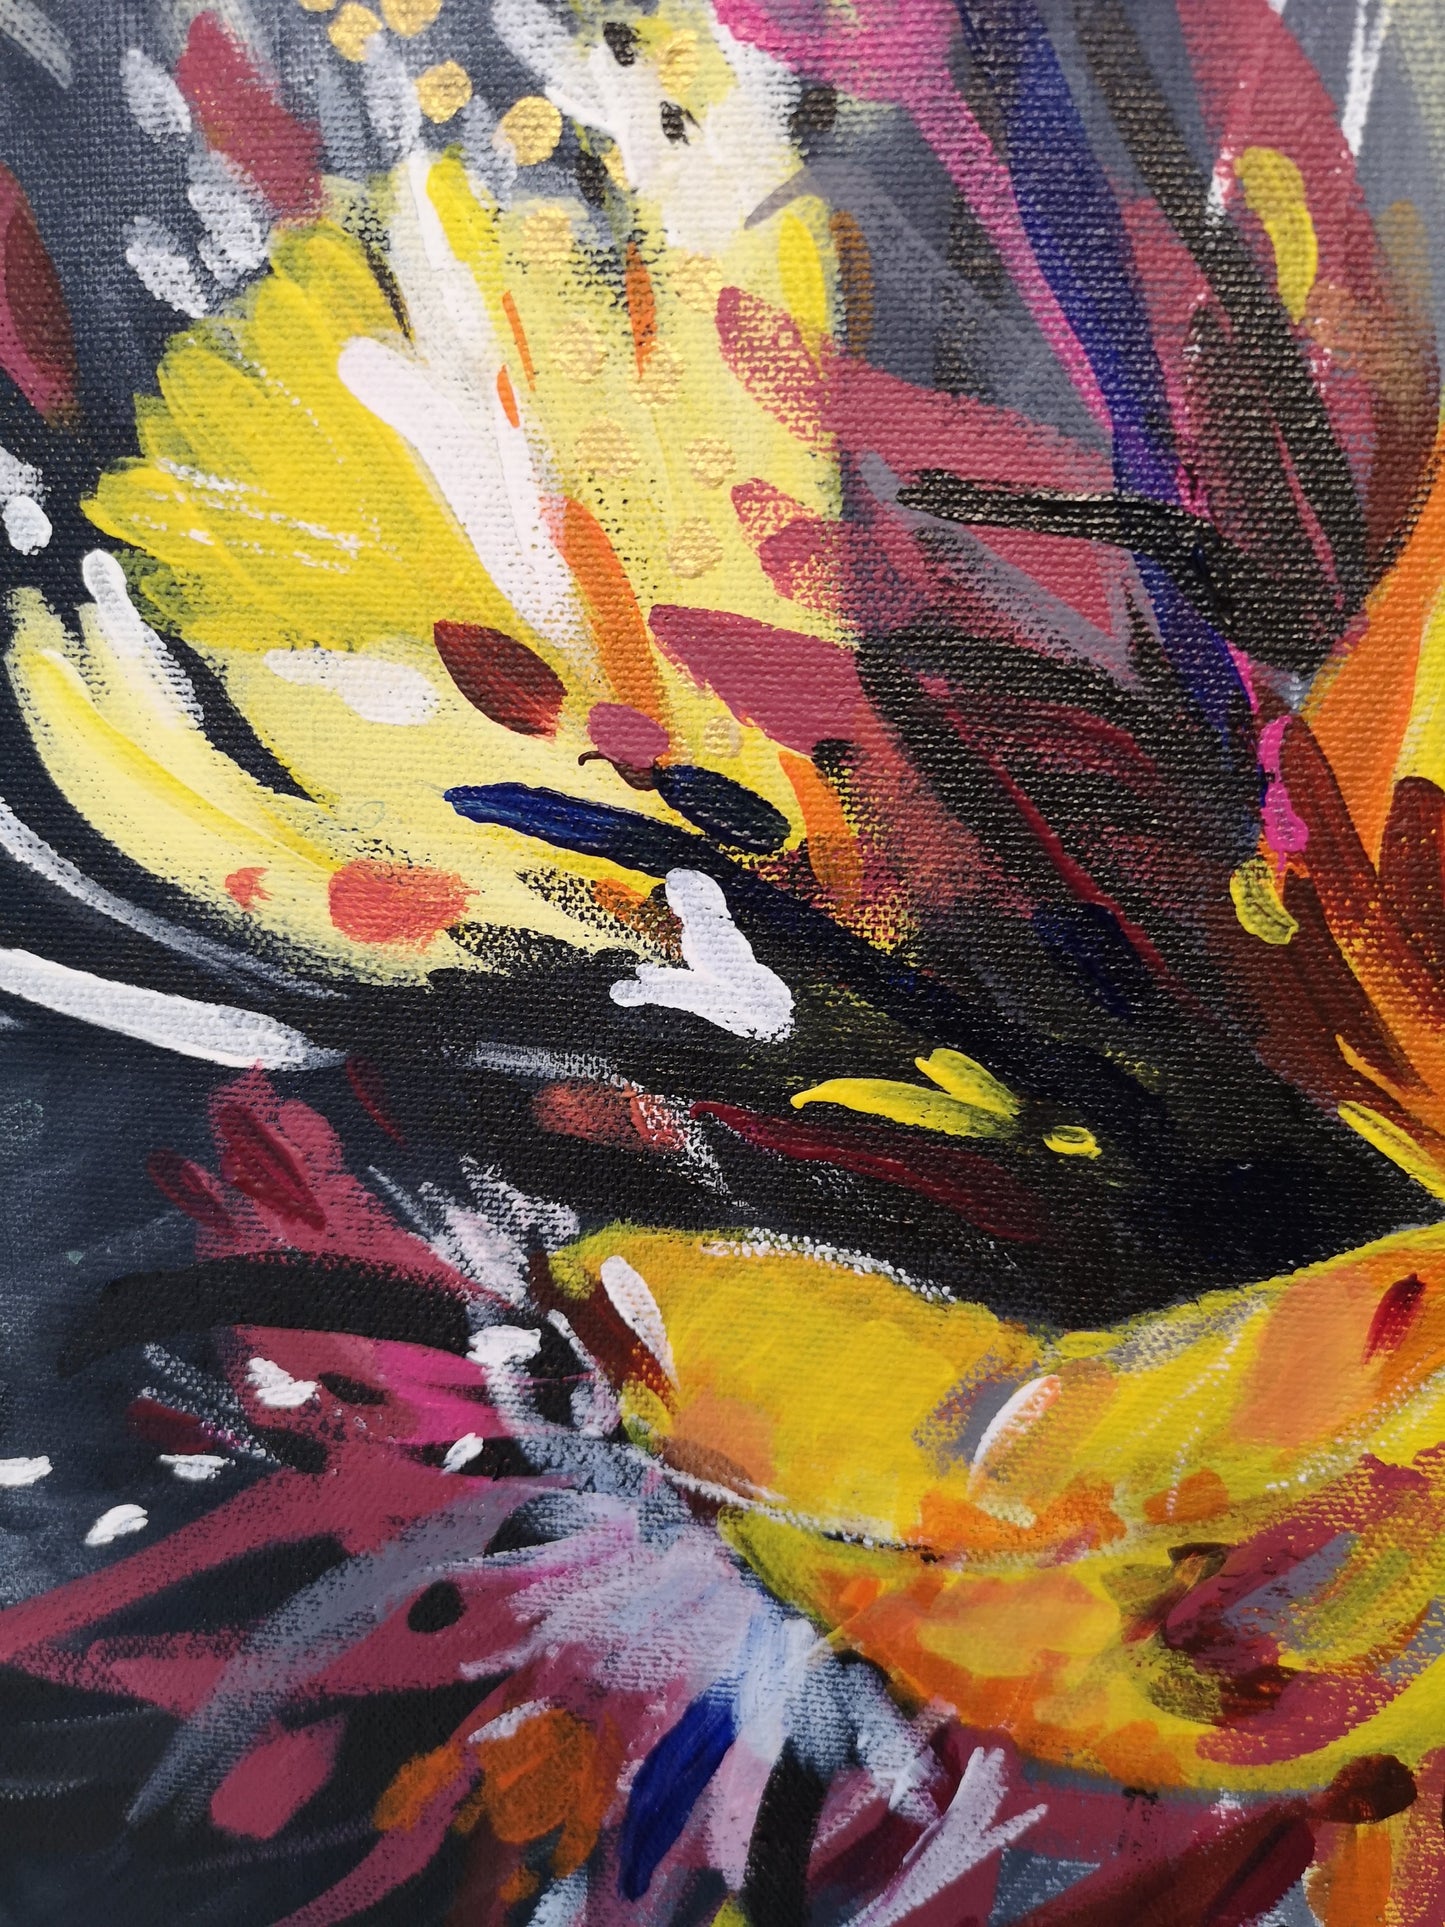 Close up details of Daffodil Surprise painting by Judy Century art showing brushstrokes and colour details